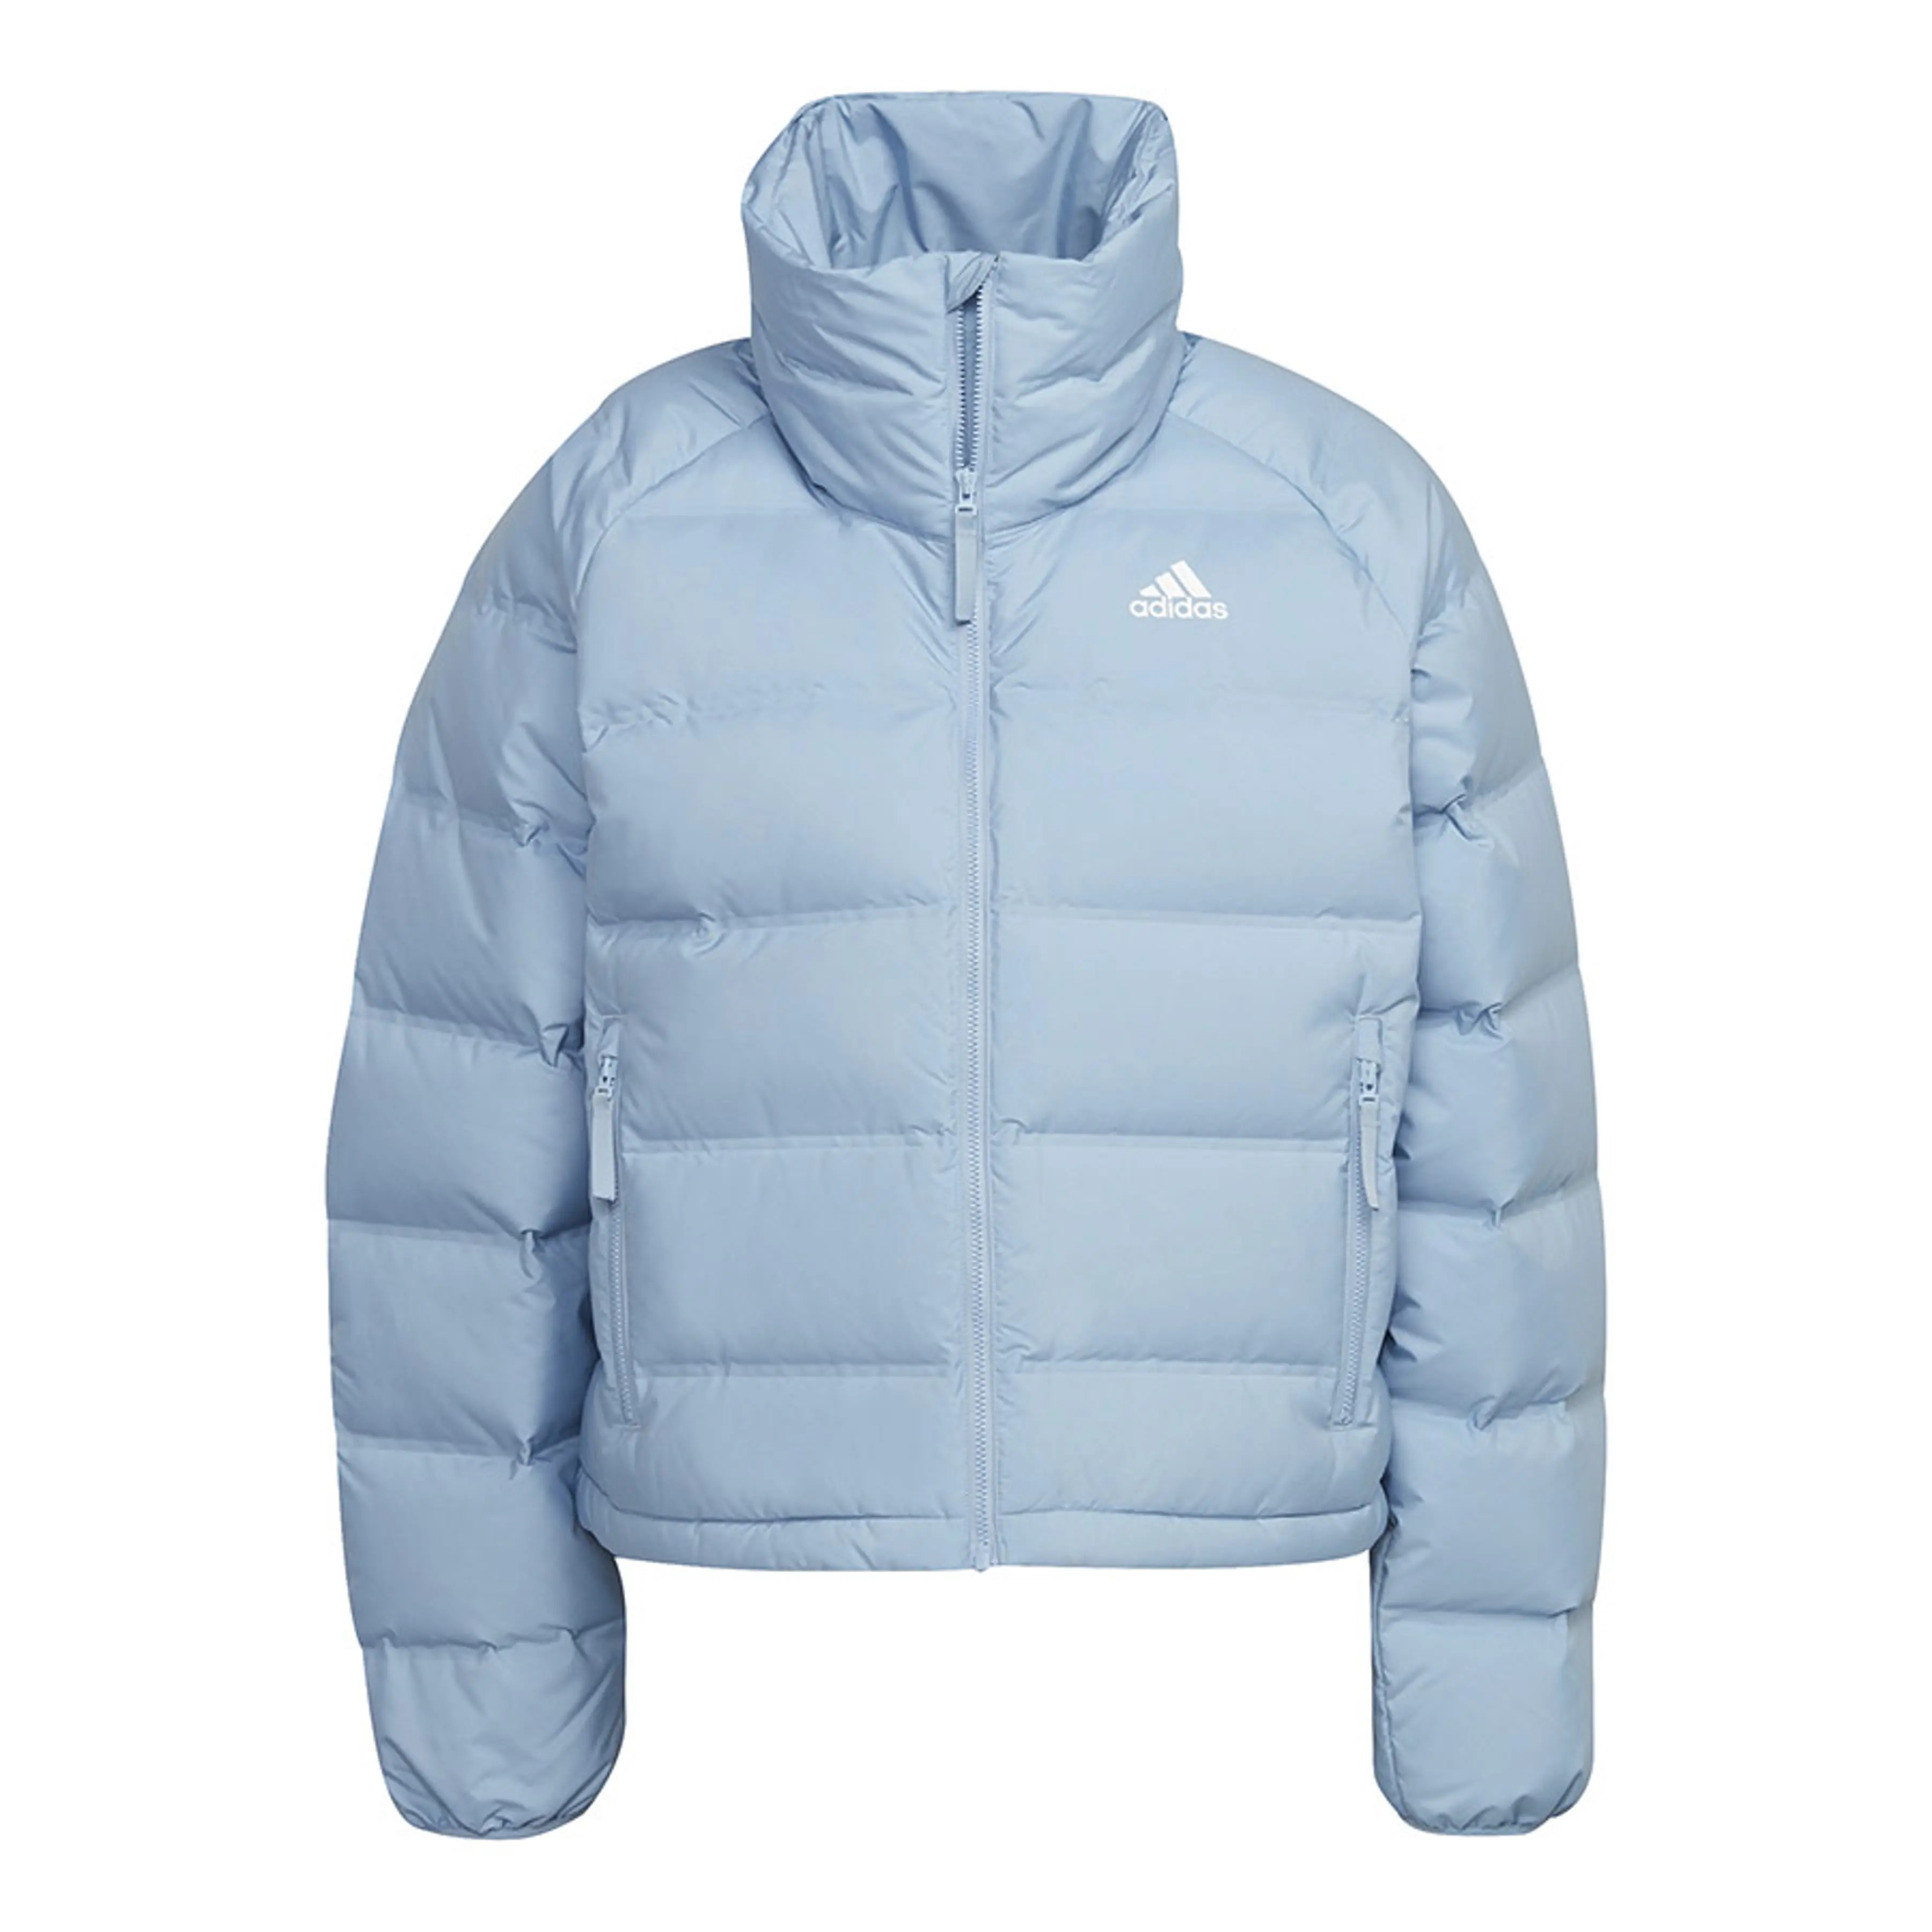 Adidas Women\'s Helionic Relaxed Sky Fit Puffer eBay Ambient Jacket, Down 